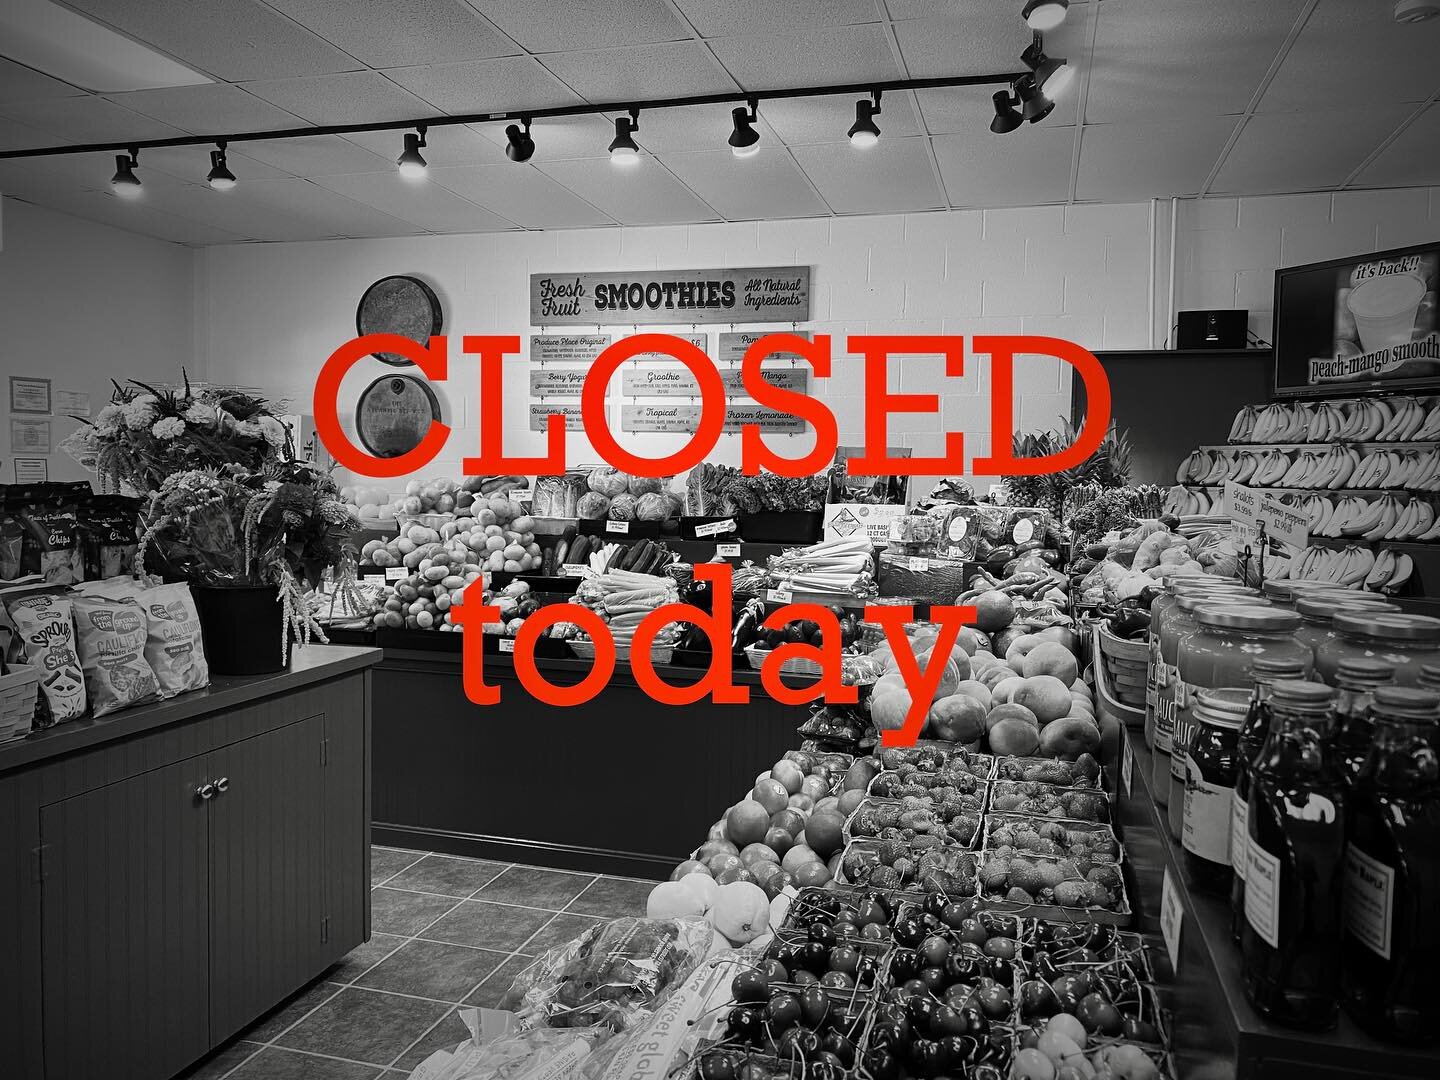 We are closed today due to the weather. We will be back to serve you tomorrow! Stay safe and enjoy the snow.